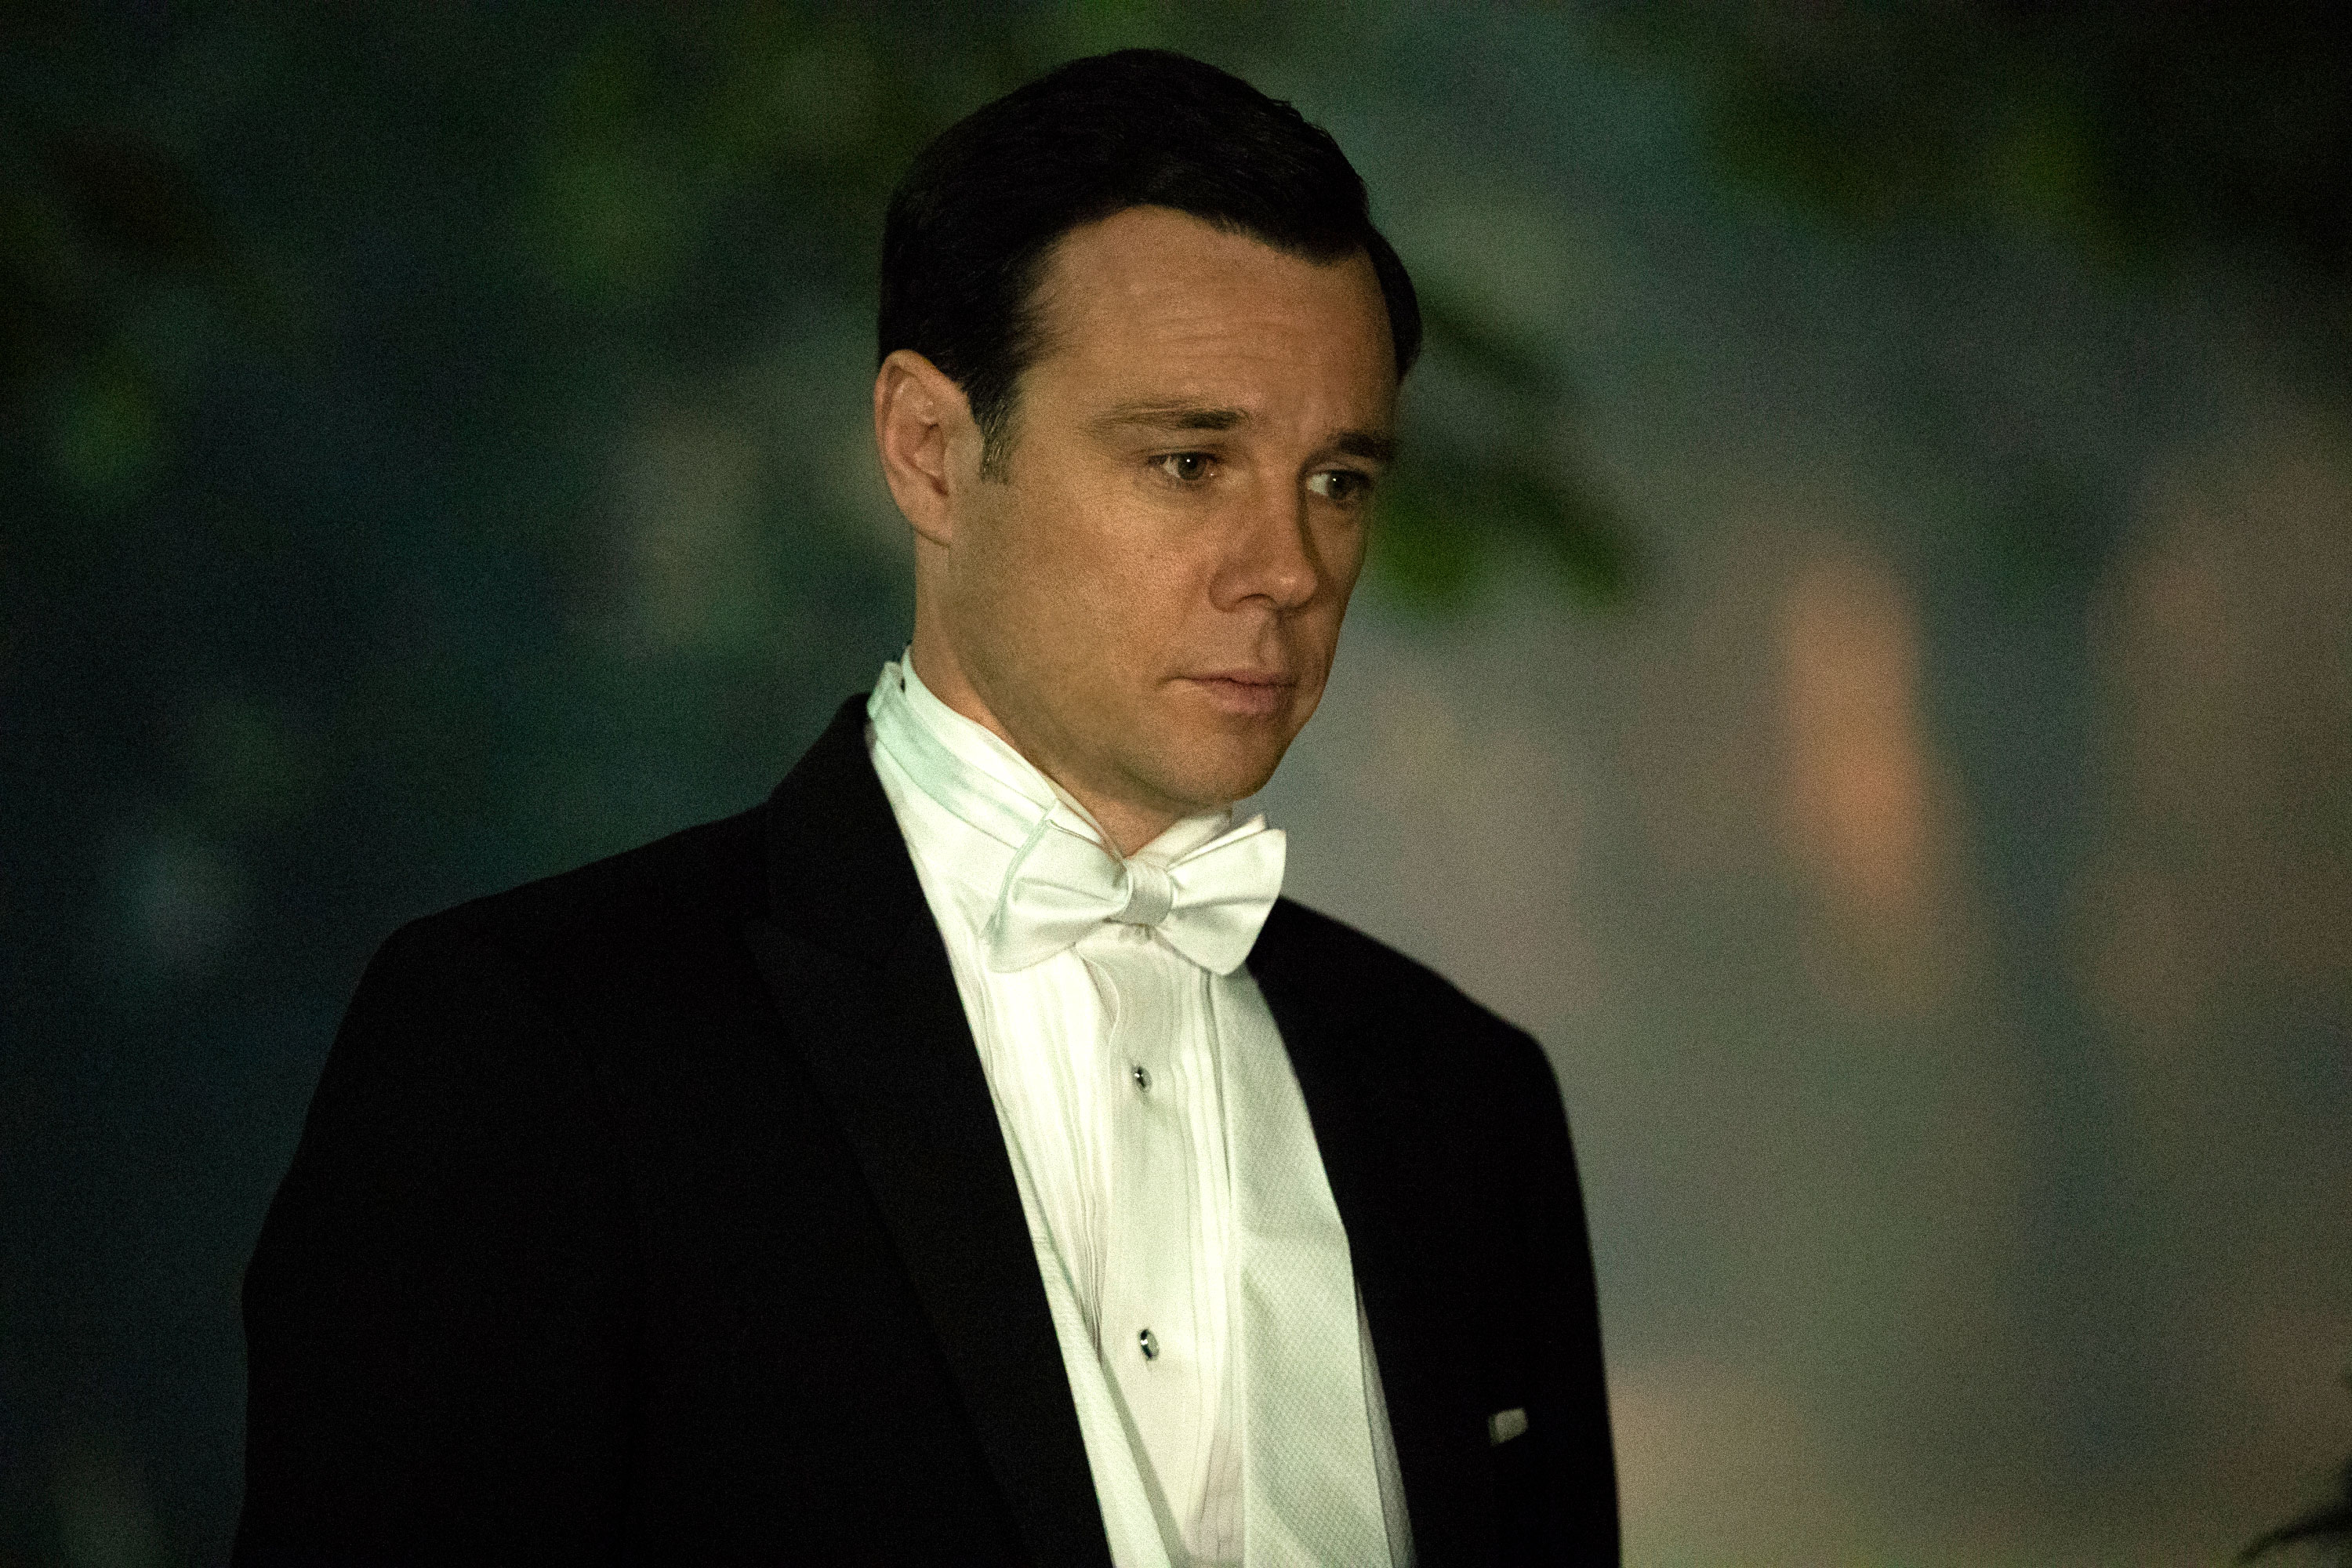 Charmed -- "Sweet Tooth" -- Image Number: CMD103a_0383.jpg -- Pictured: Rupert Evans as Harry -- Photo: Jack Rowand/The CW -- ÃÂ© 2018 The CW Network, LLC. All rights reserved.